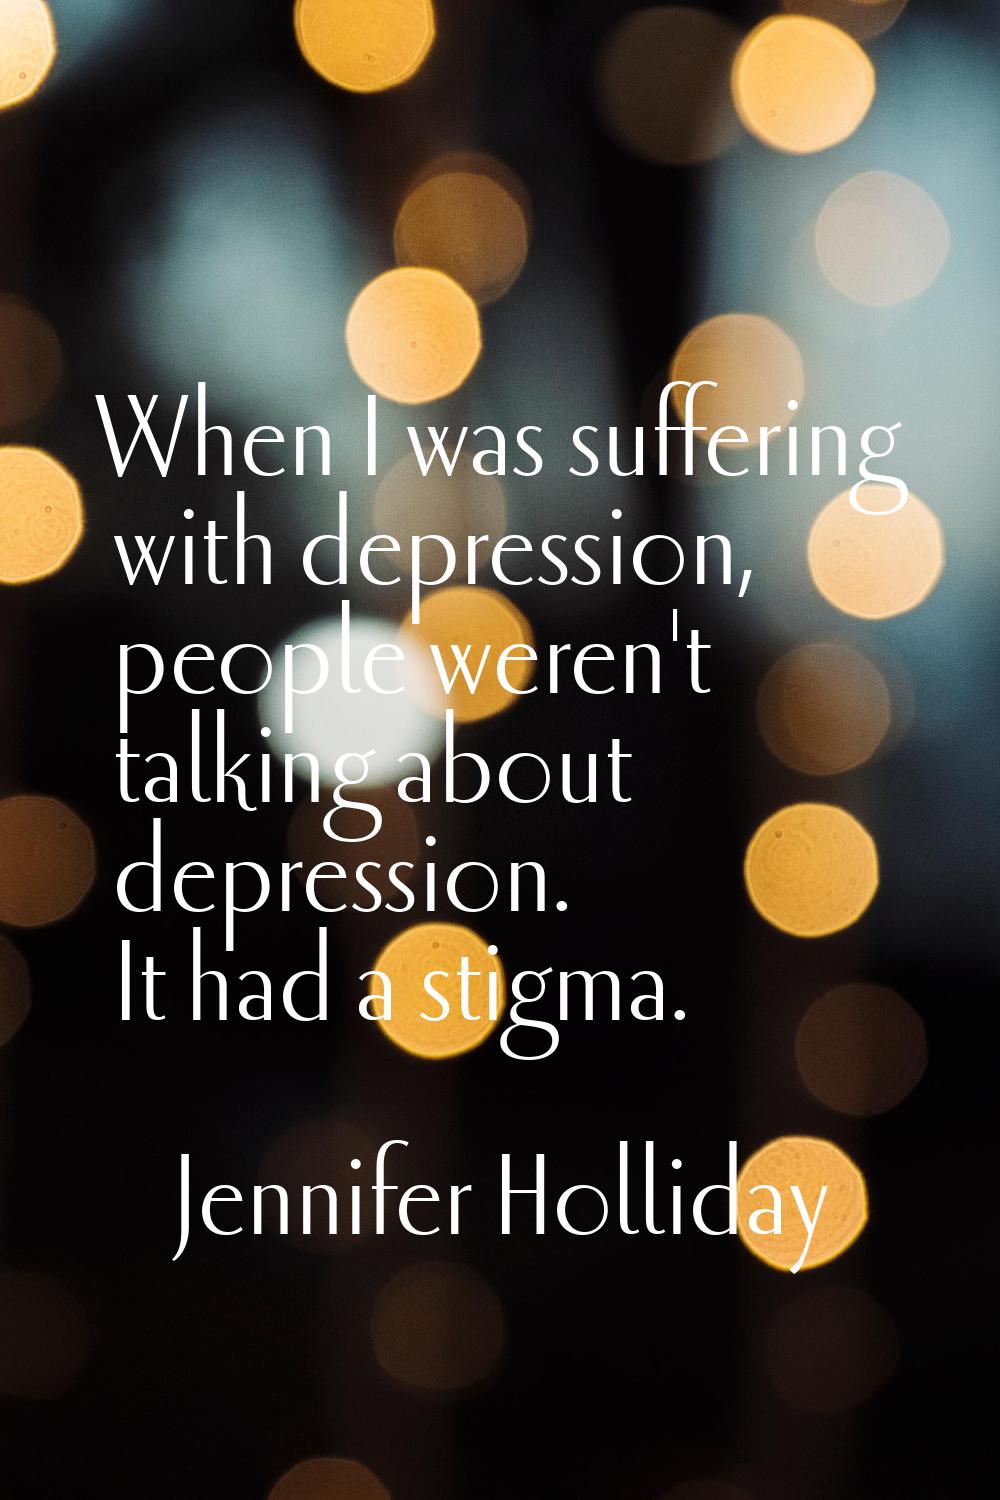 When I was suffering with depression, people weren't talking about depression. It had a stigma.